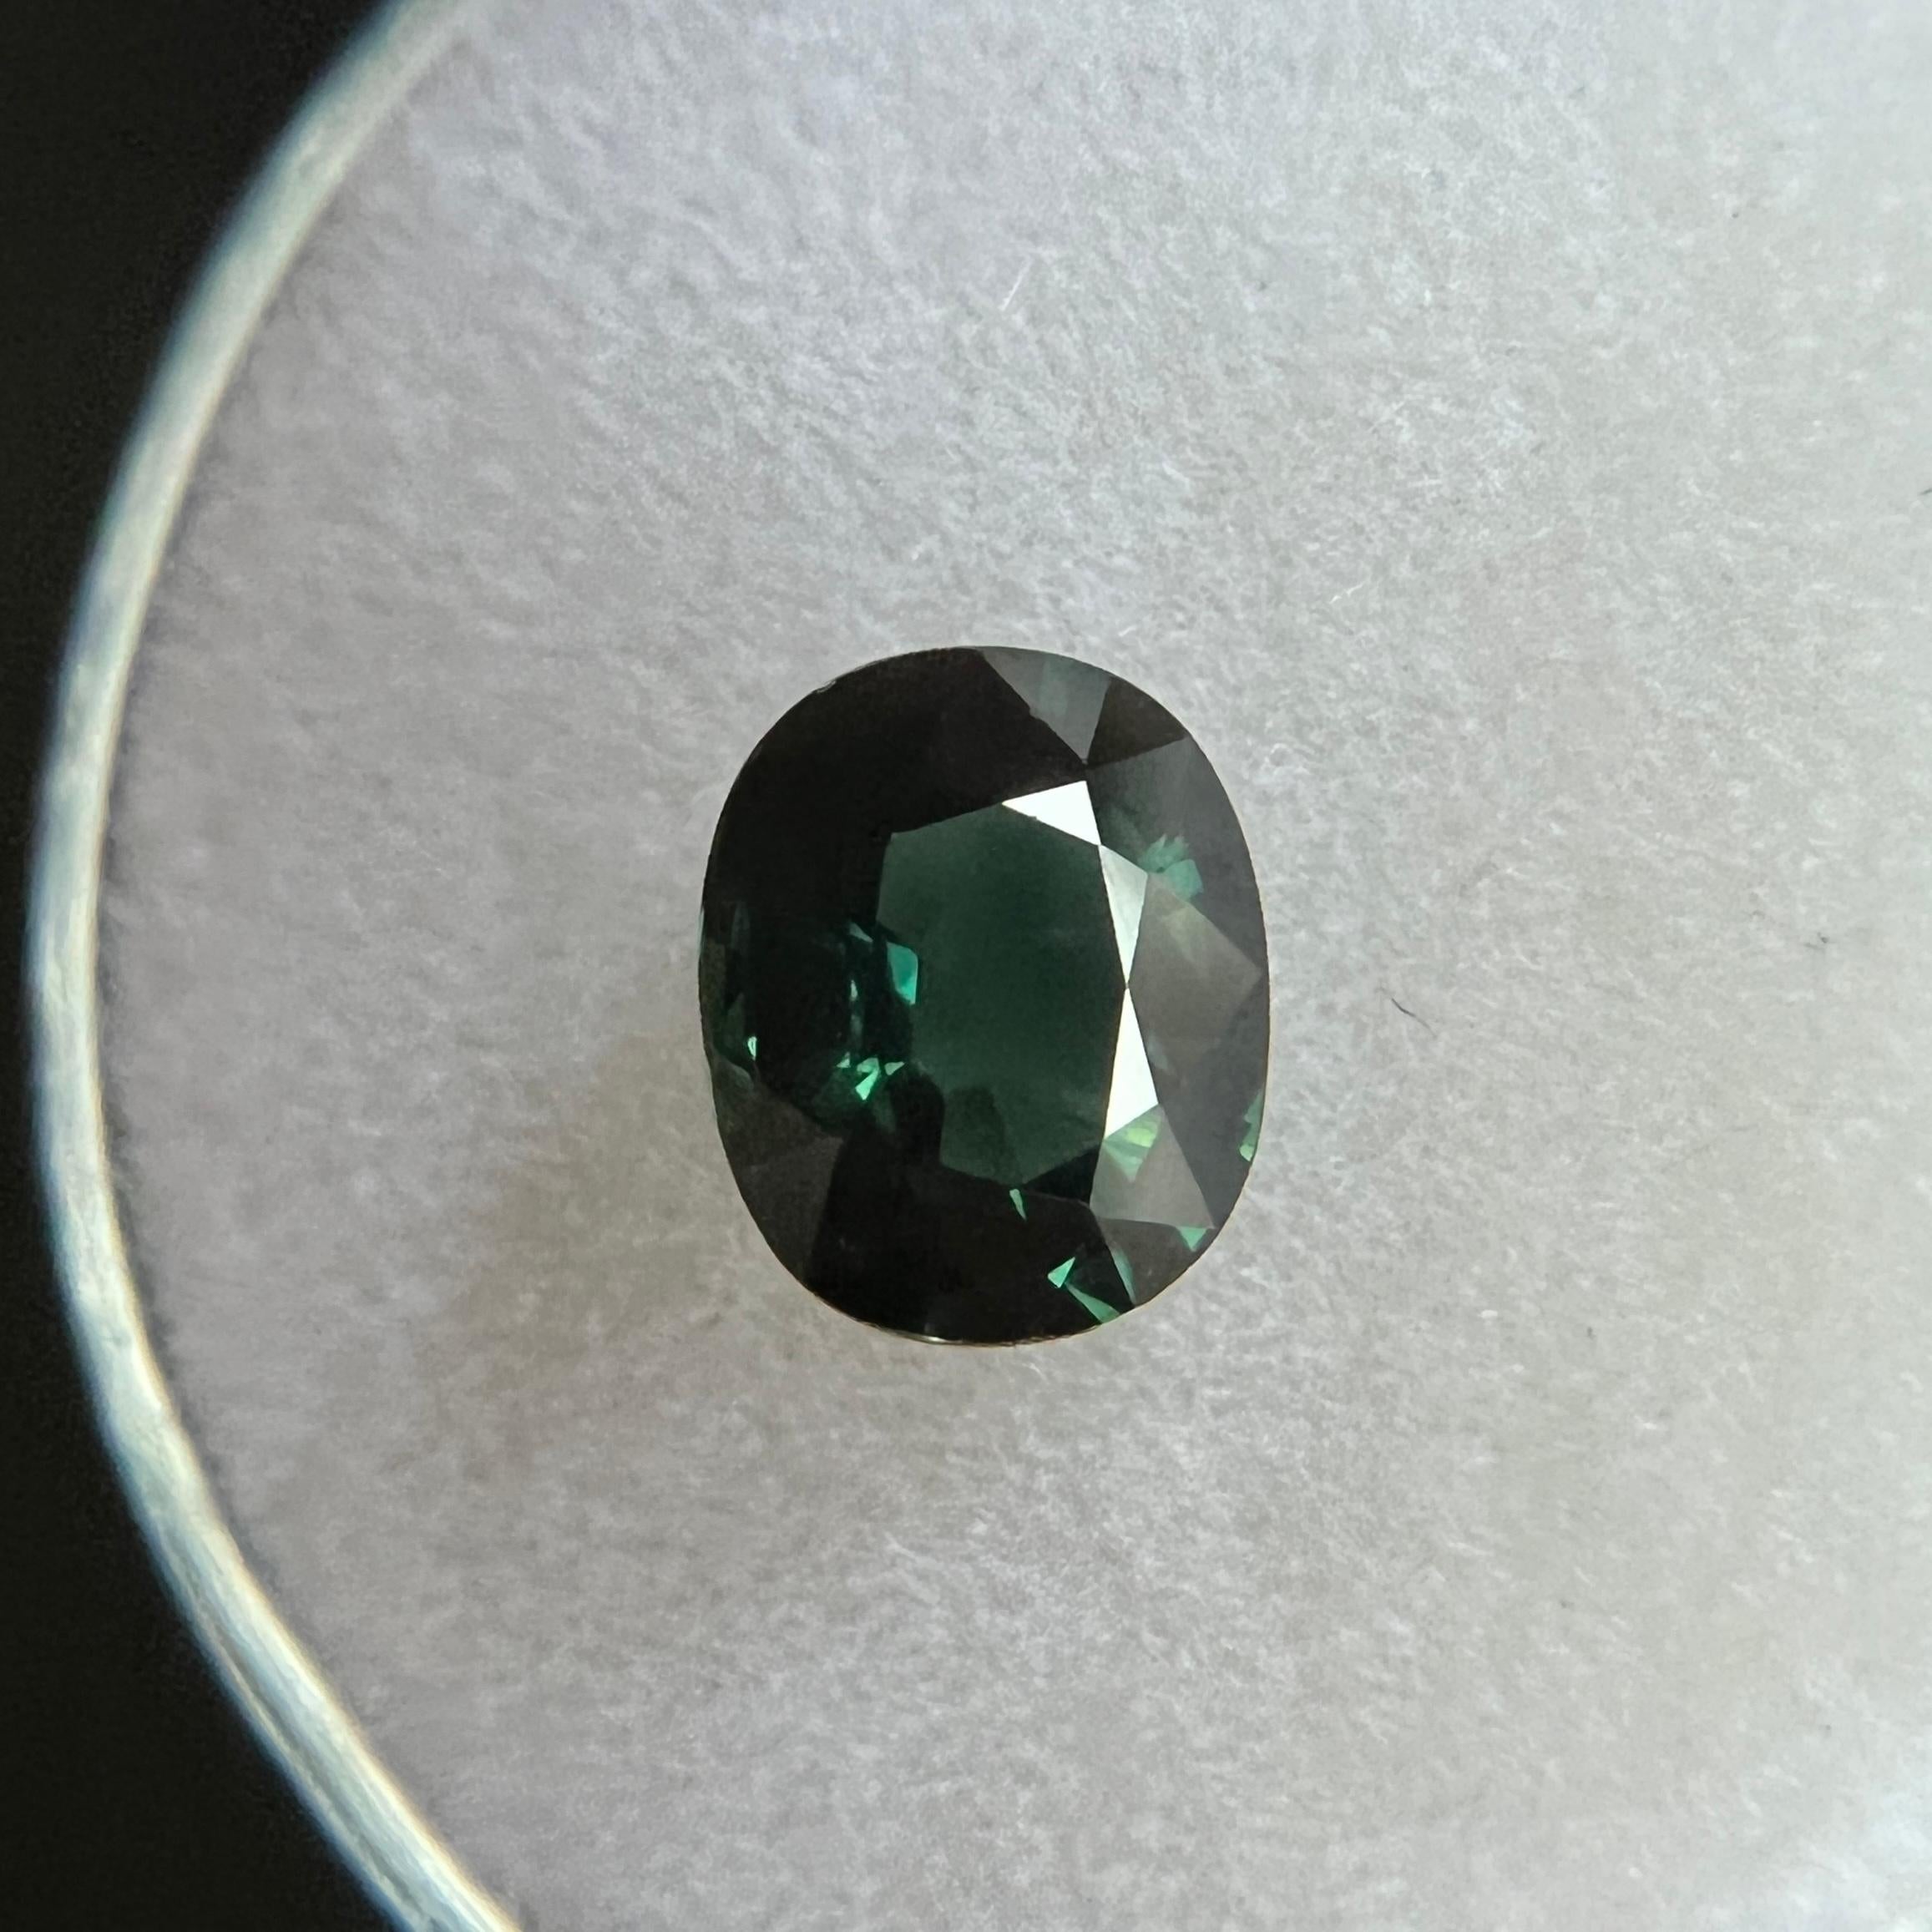 Deep Blue Green Australian Sapphire Gemstone.

Natural sapphire with a stunning deep greenish blue colour. 1.45 Carat with very good clarity. Clean stone with only some very small natural inclusions visible when looking closely.

Also has a very